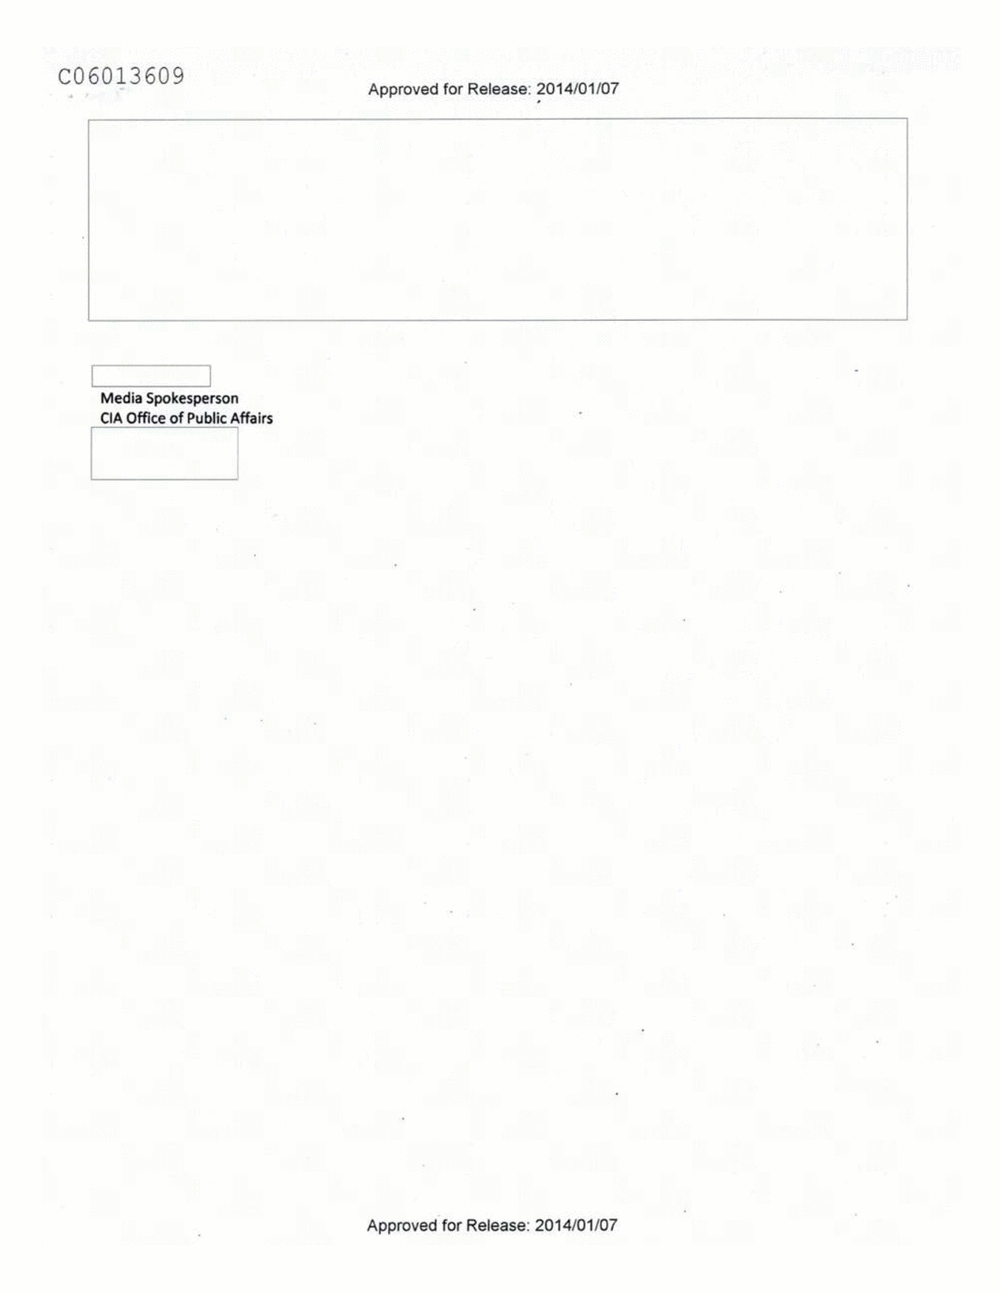 Page 426 from Email Correspondence Between Reporters and CIA Flacks